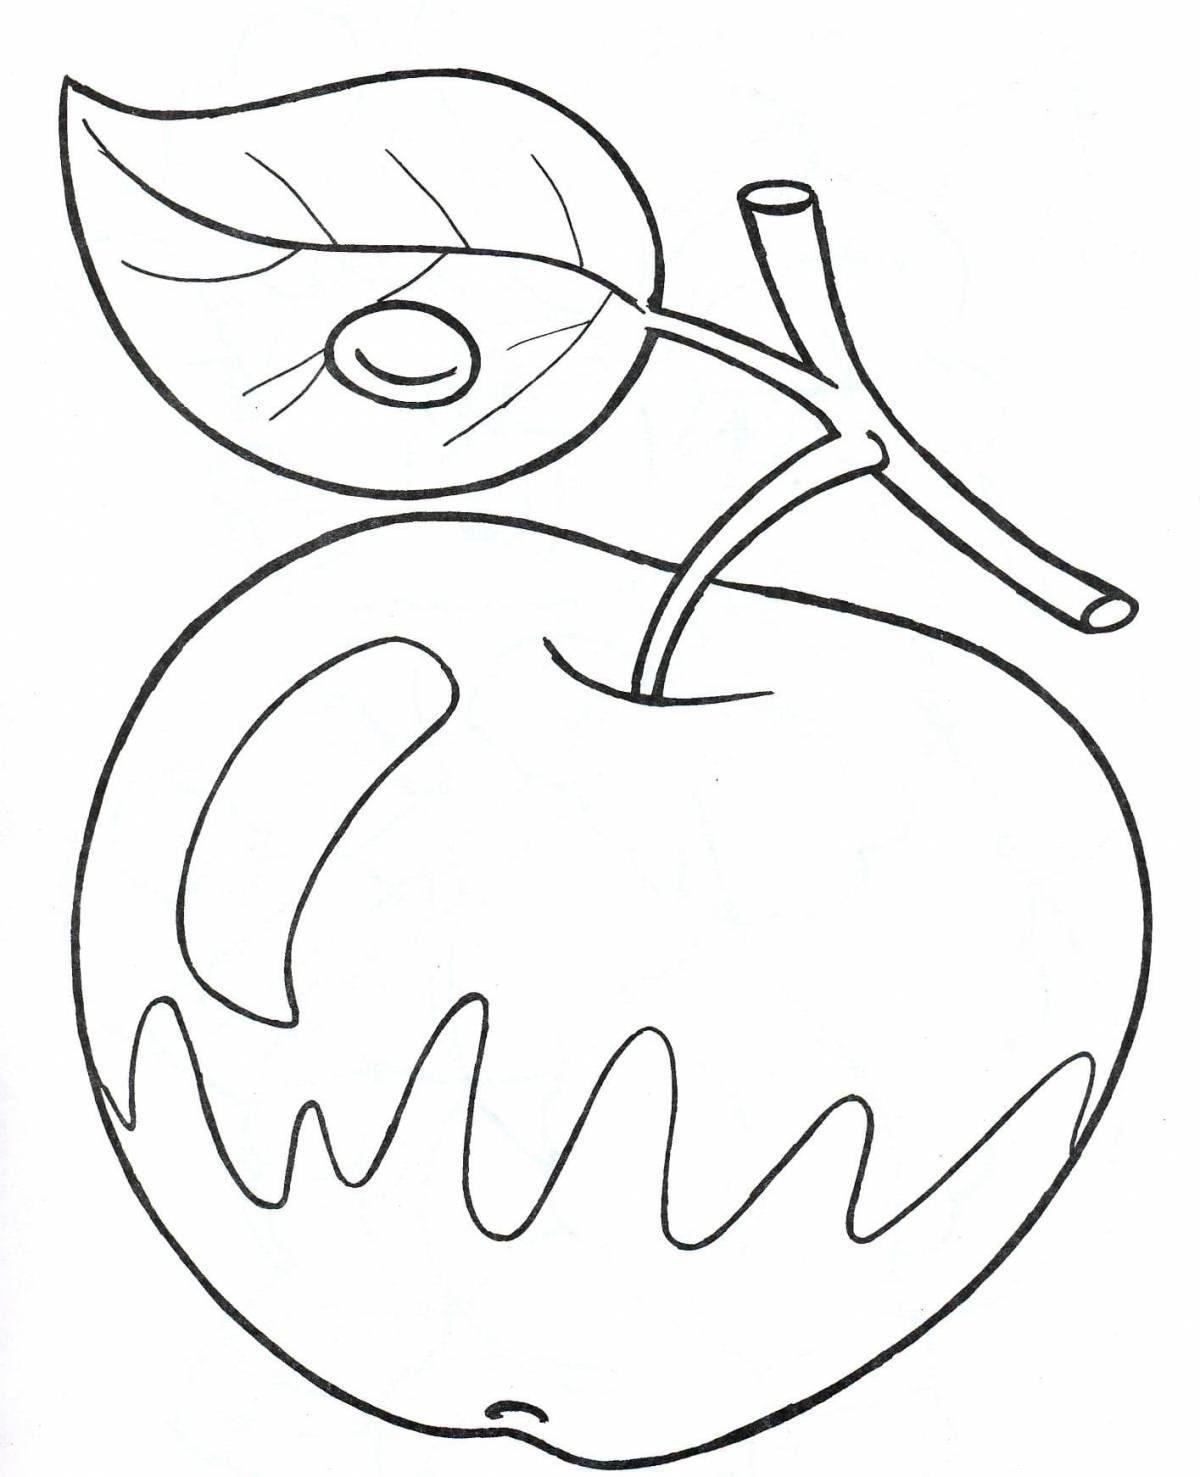 Glowing apple coloring book for kids